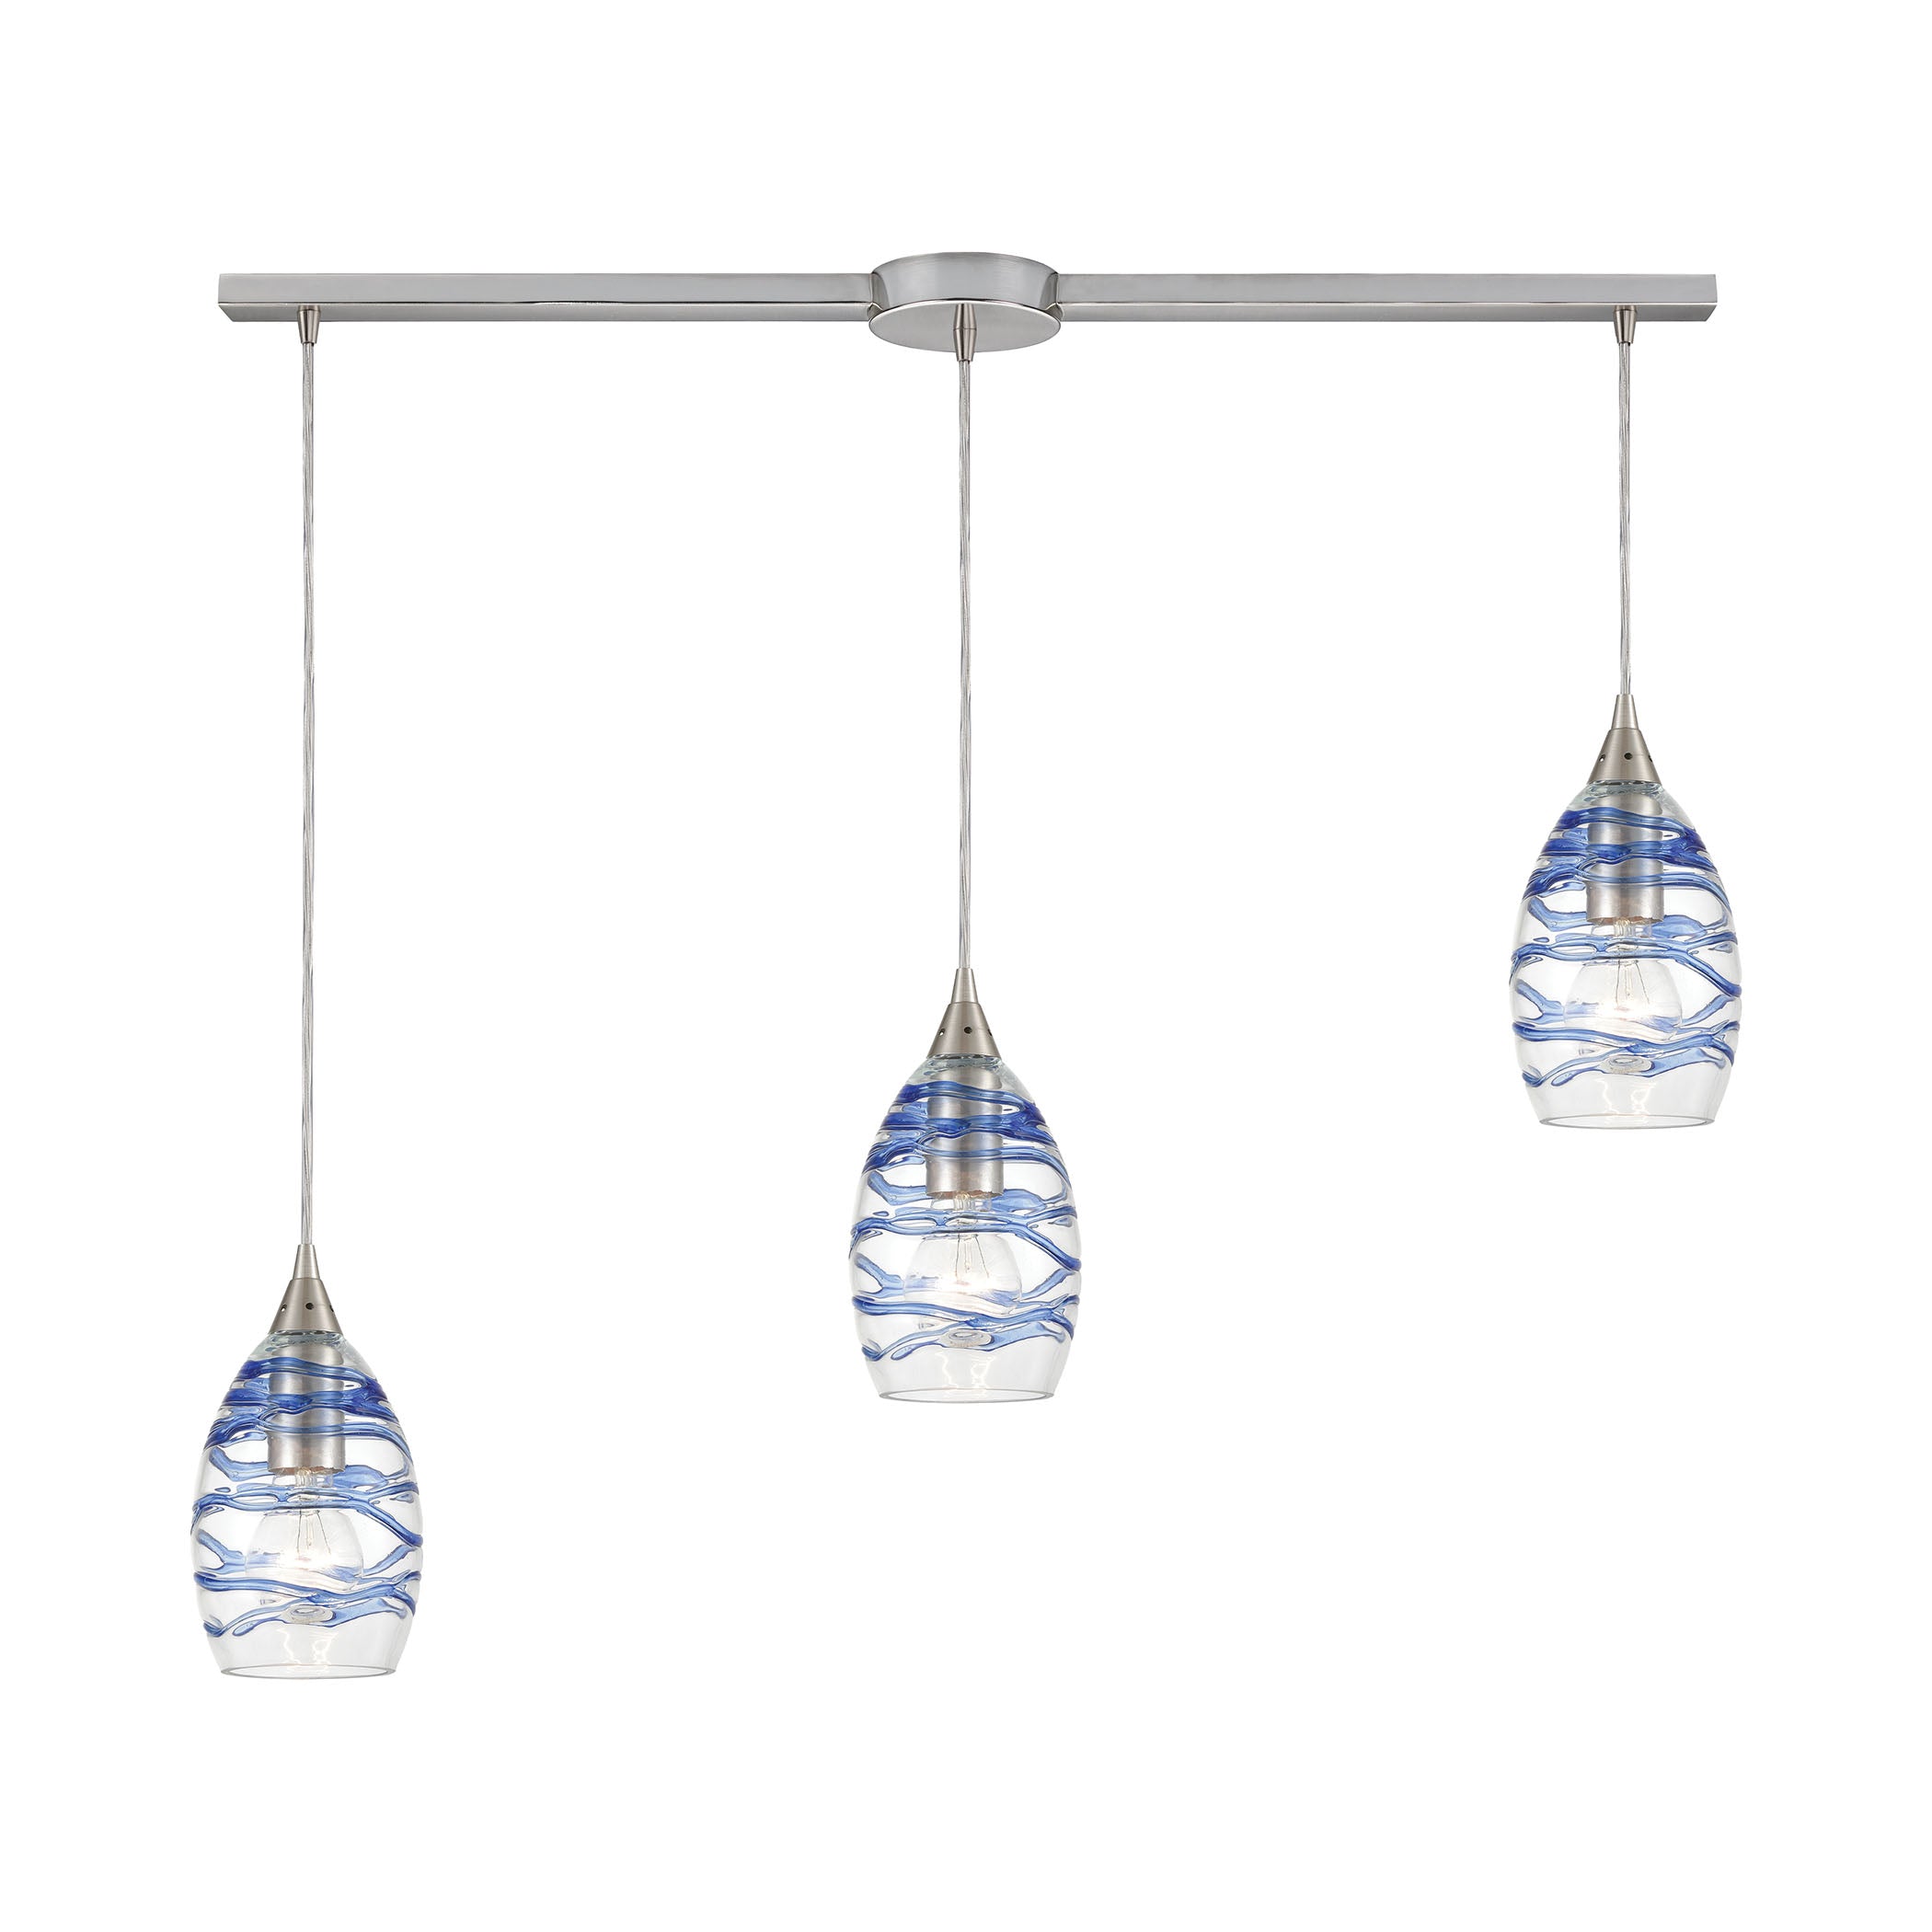 ELK Lighting 31742/3L Vines 3-Light Linear Mini Pendant Fixture in Satin Nickel with Clear Glass with Aqua Blue Strip